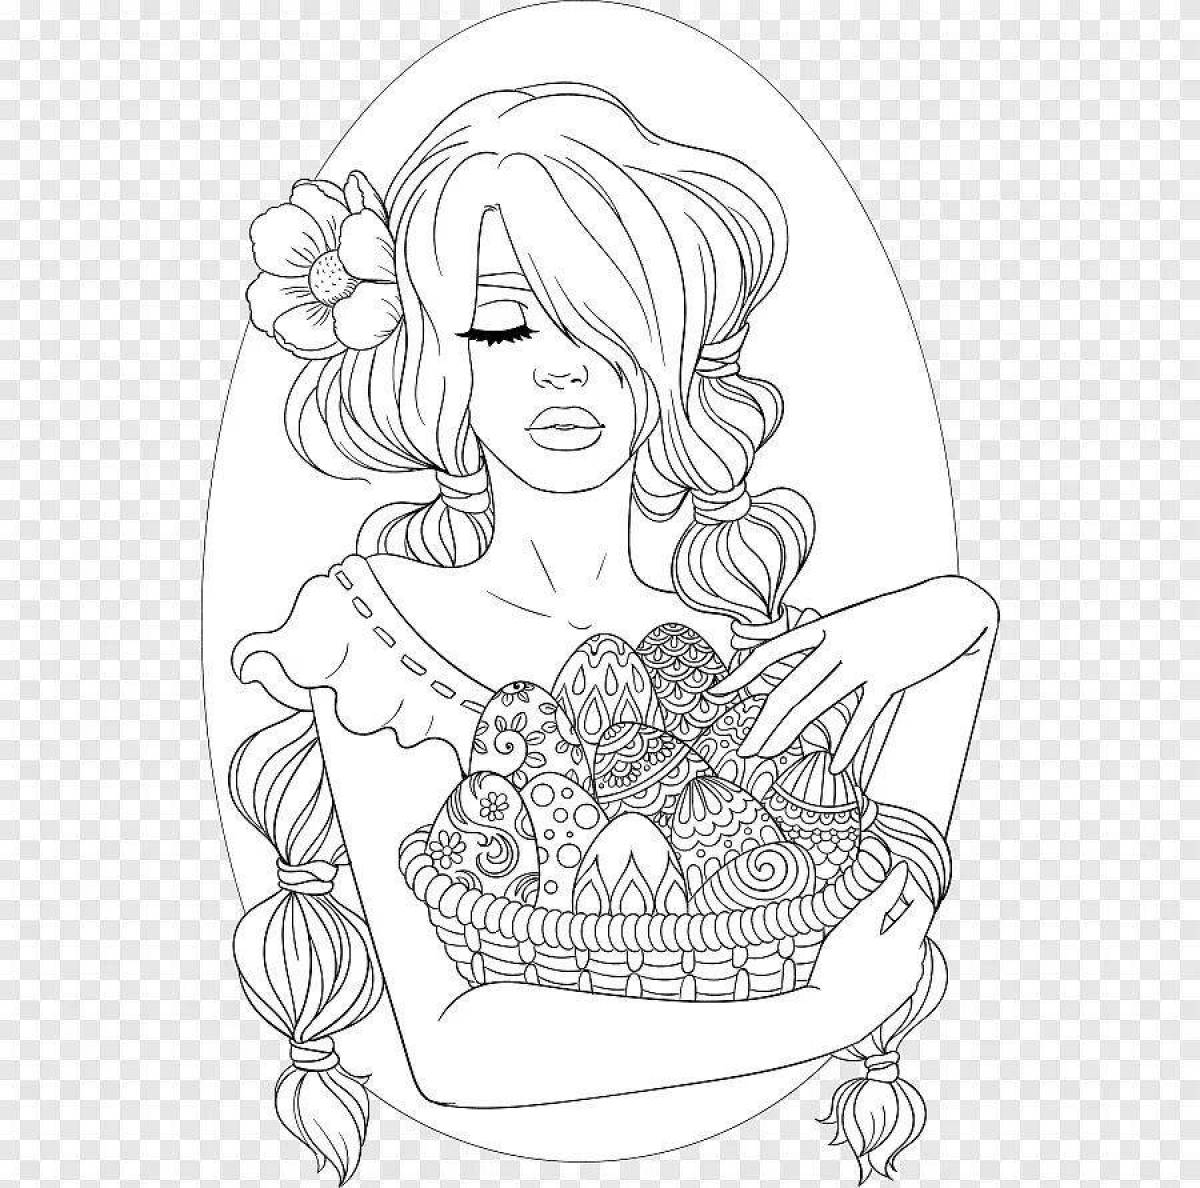 Color-frenzy coloring page for 20 year old girls